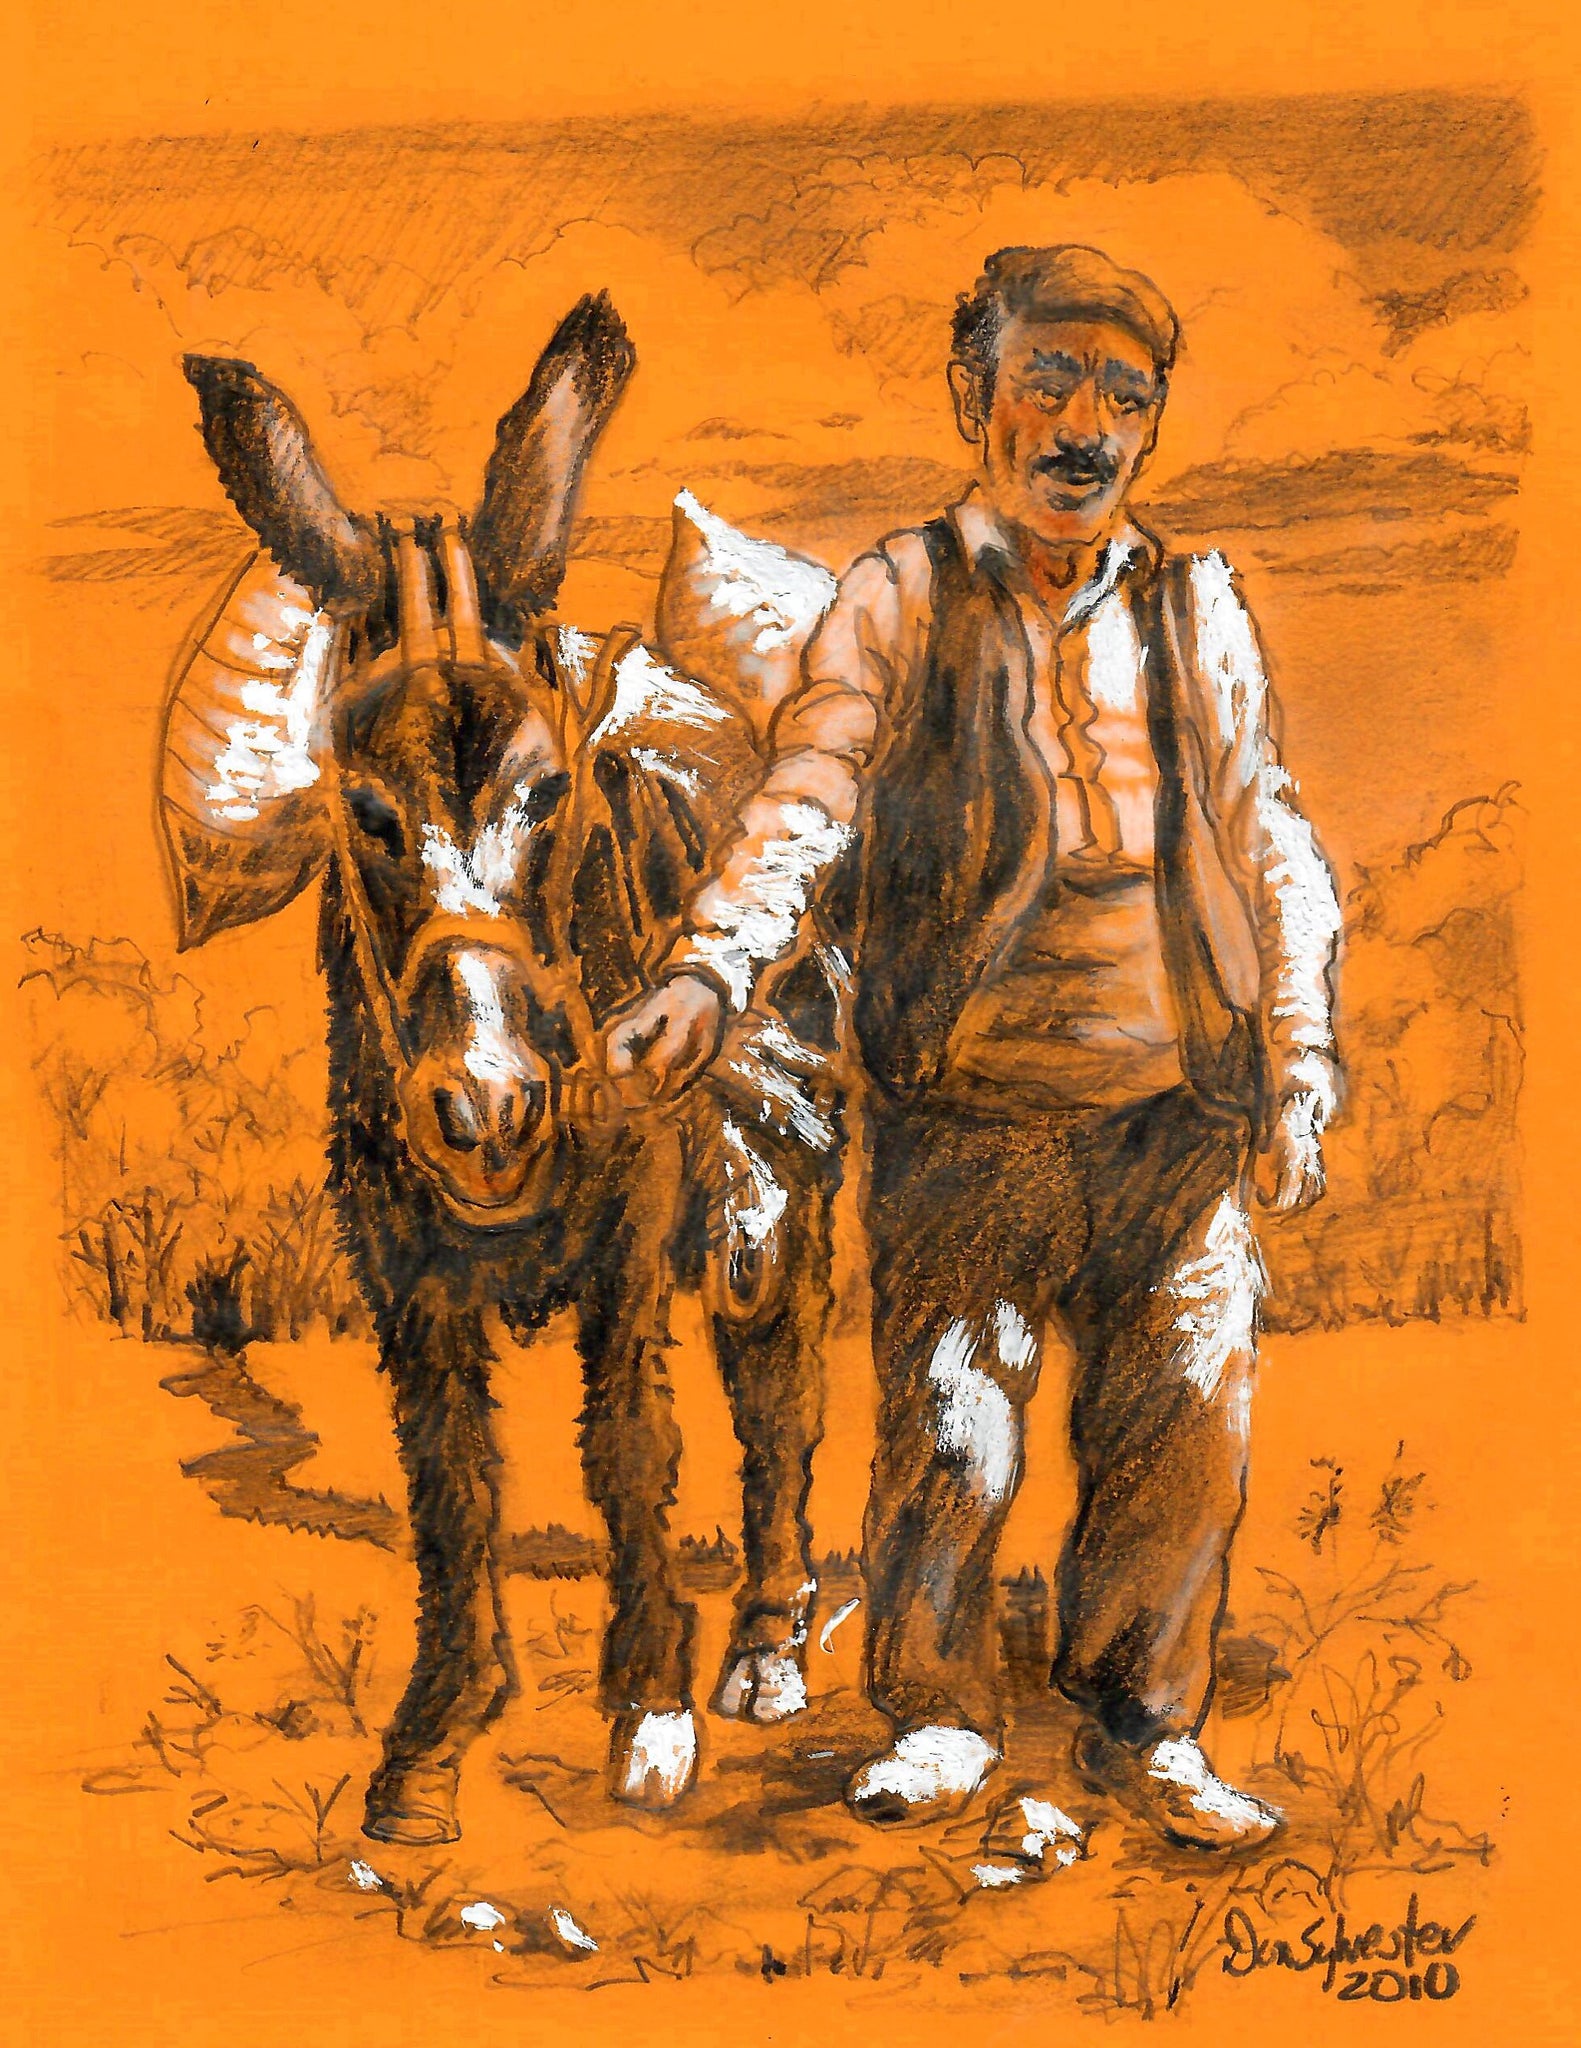 WESTERN - OLD MAN WALKING WITH HIS DONKEY "LOADED" WITH PACKAGES